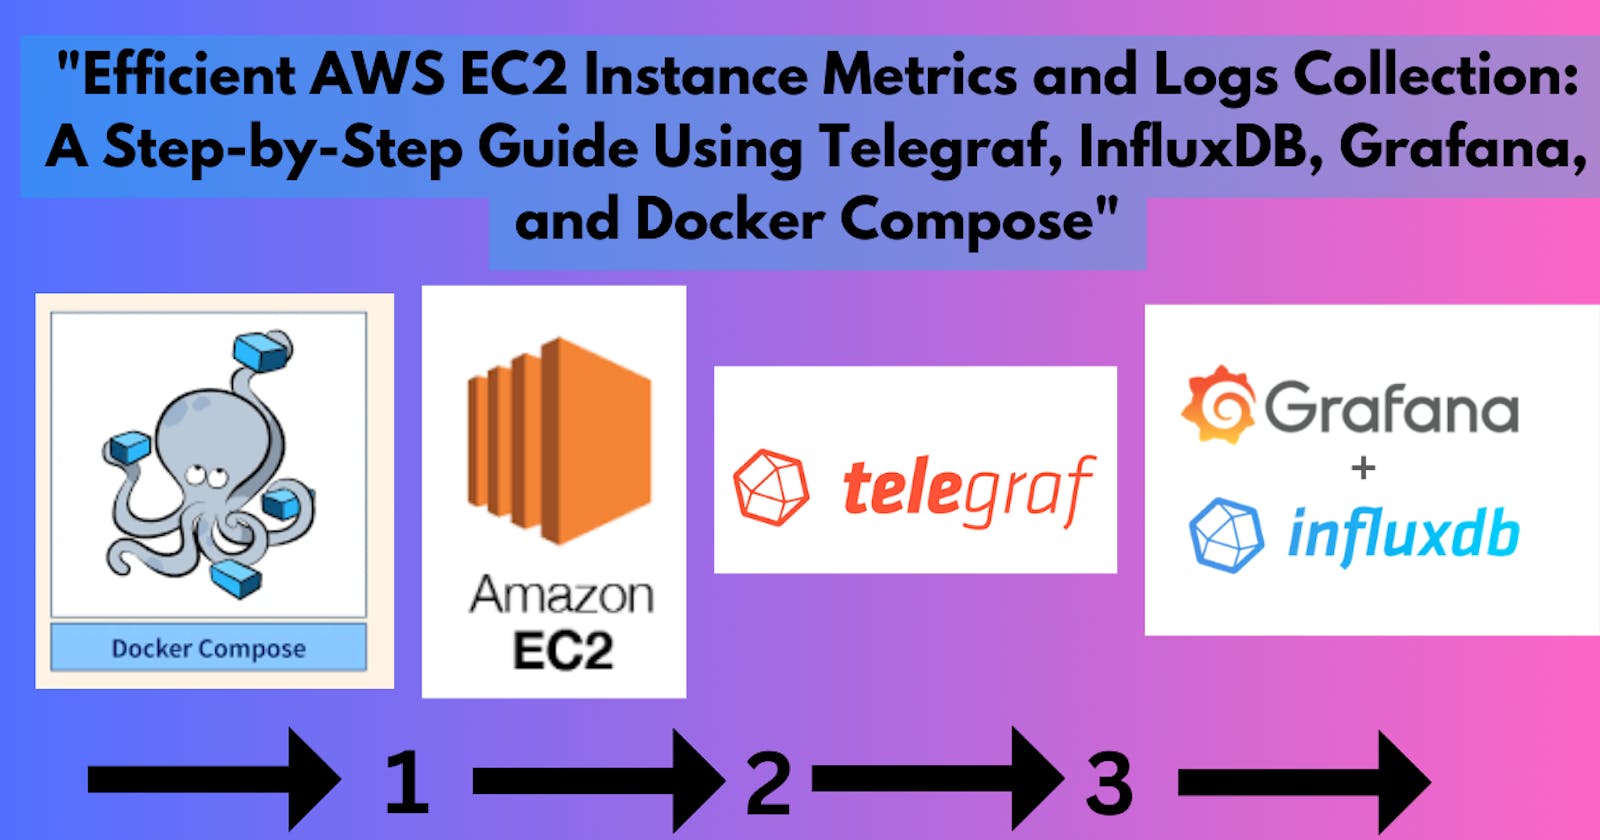 "Efficient AWS EC2 Instance Metrics and Logs Collection: A Step-by-Step Guide Using Telegraf, InfluxDB, Grafana, and Docker Compose"